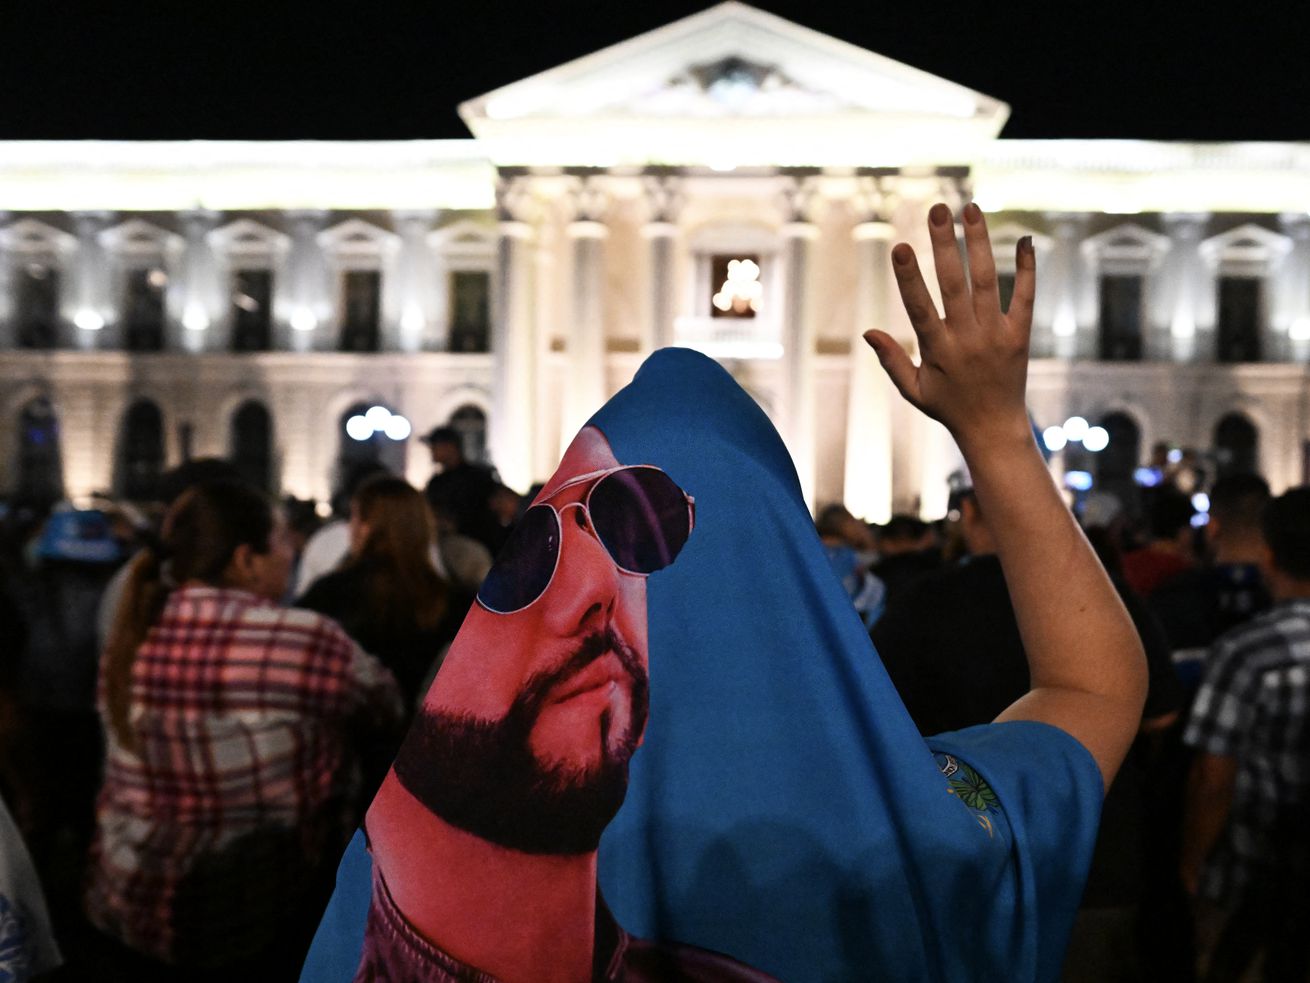 Bukele supporters gather outside the National Palace in San Salvador at night. The person closest to the camera is draped in a printed image of Bukele wearing sunglasses.